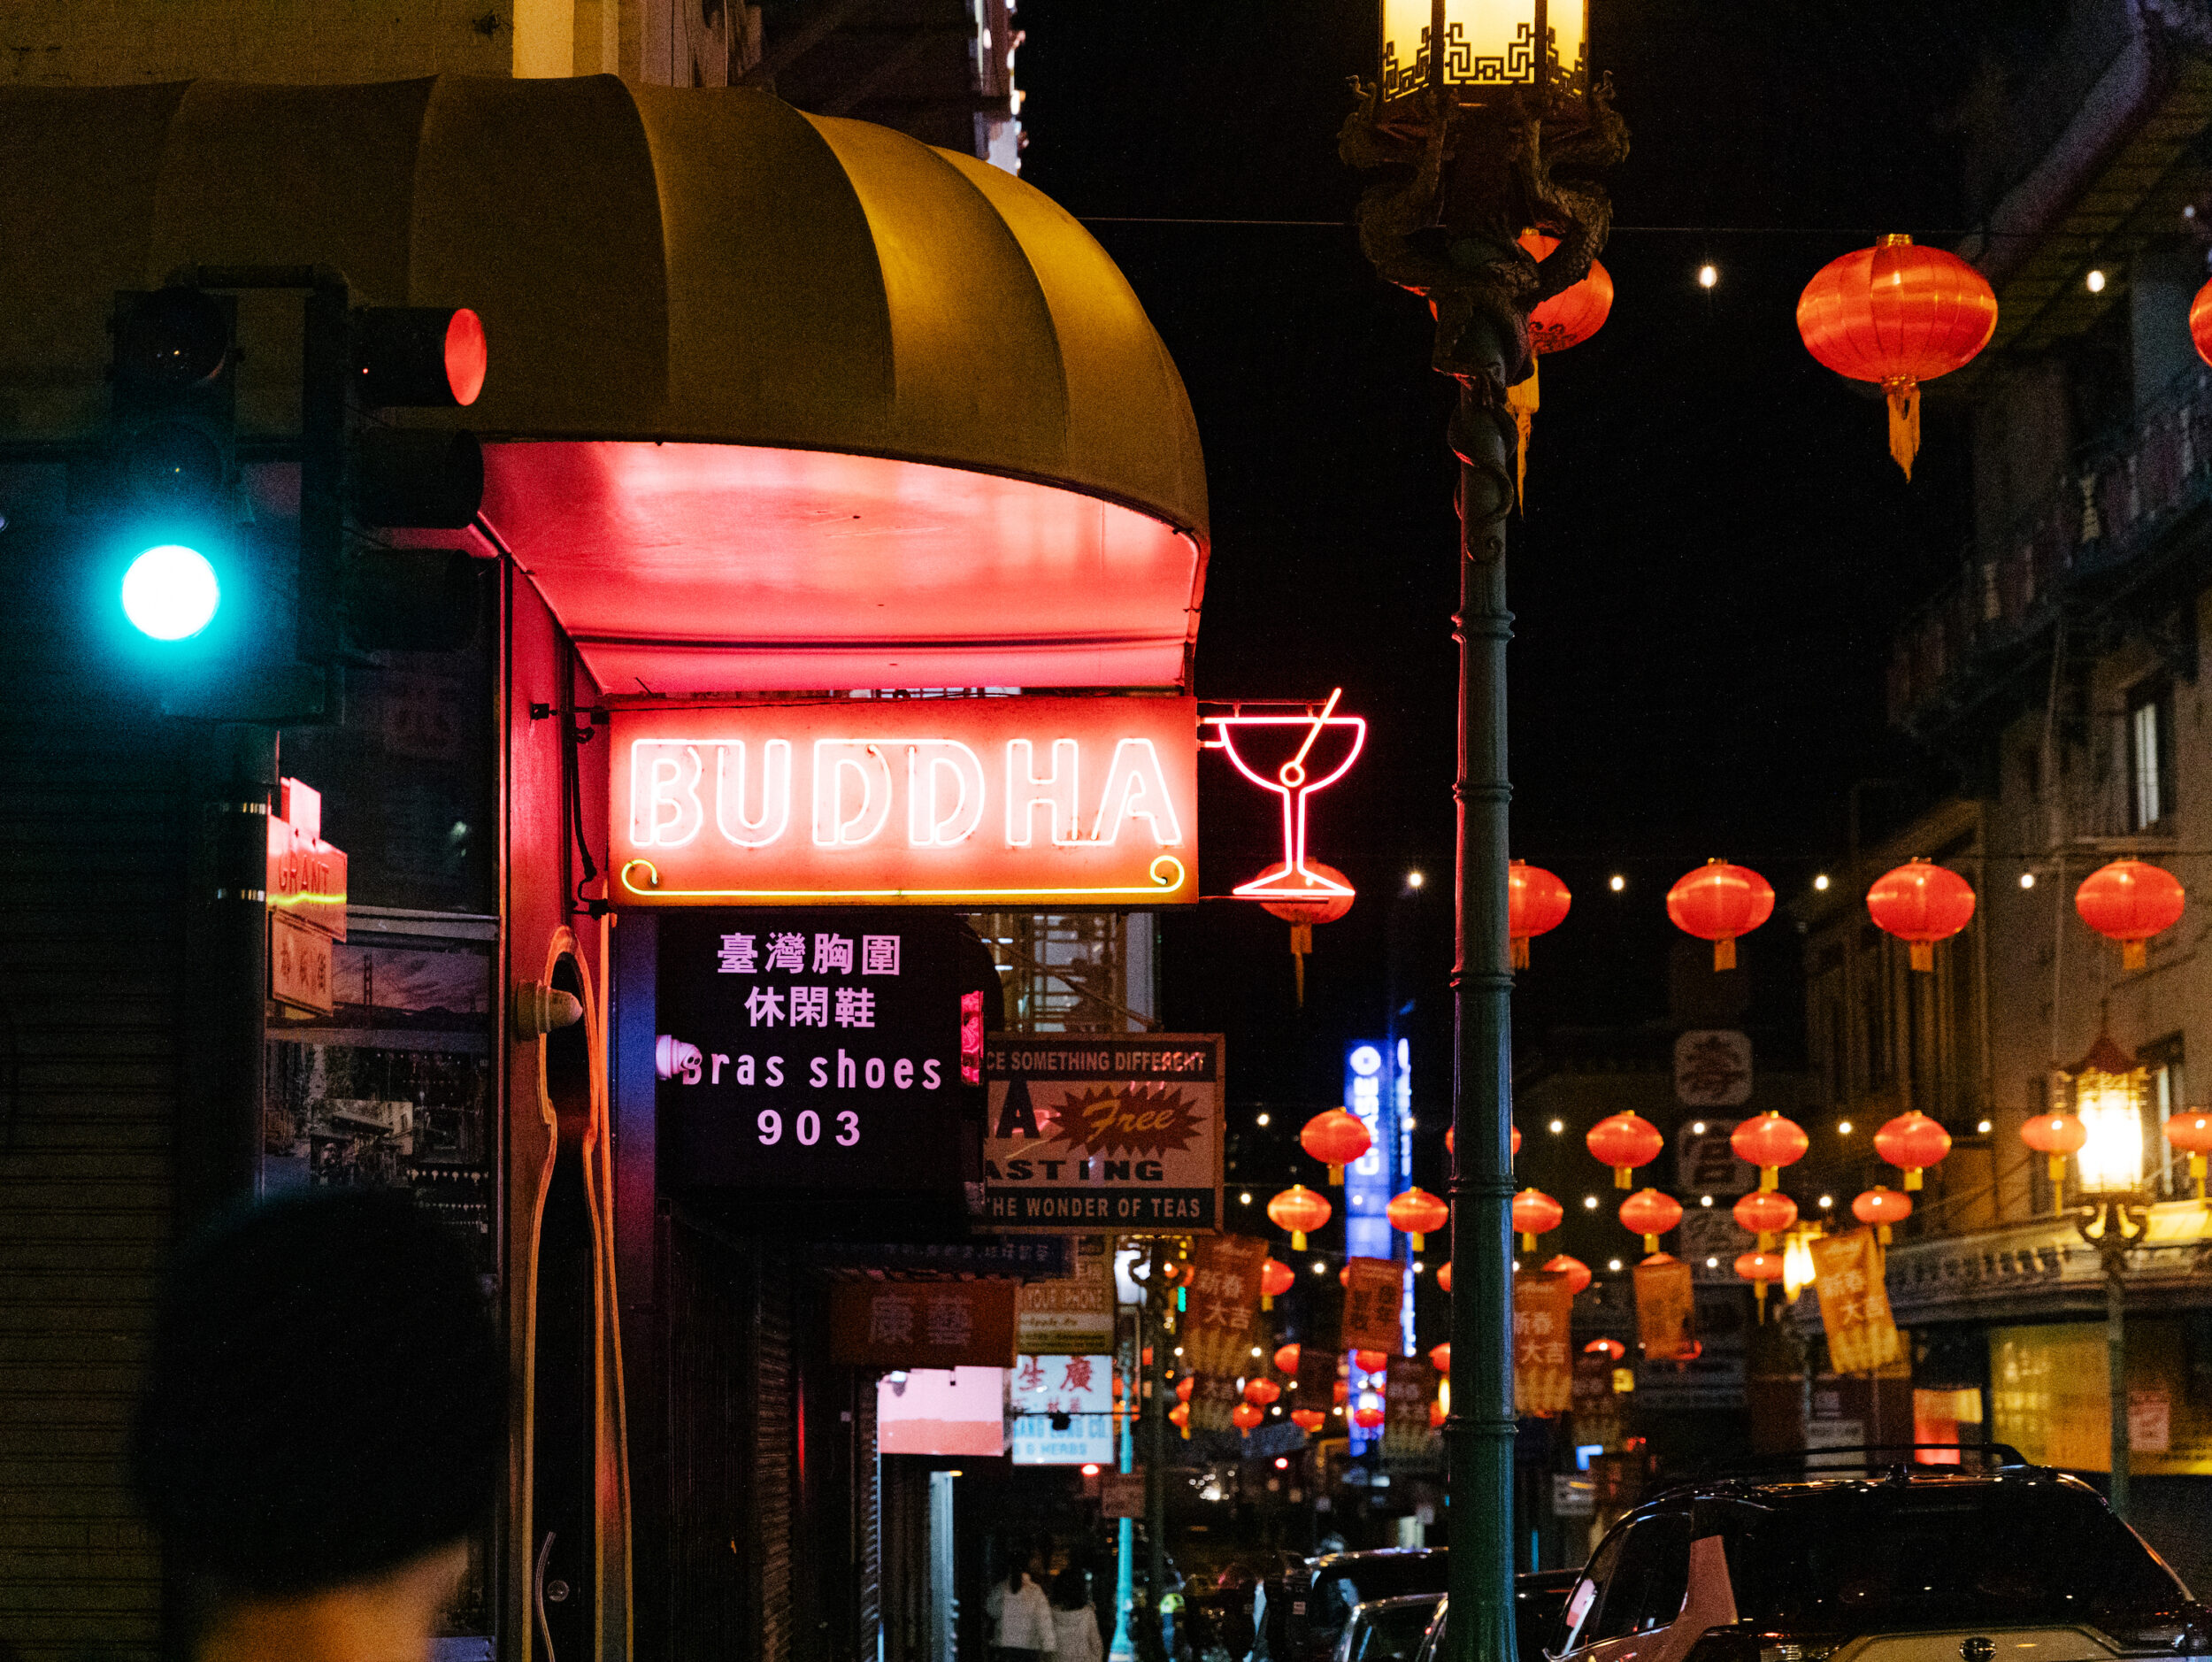 The red neon of Buddha lounge shines in the darkness in San Francisco's Chinatown.